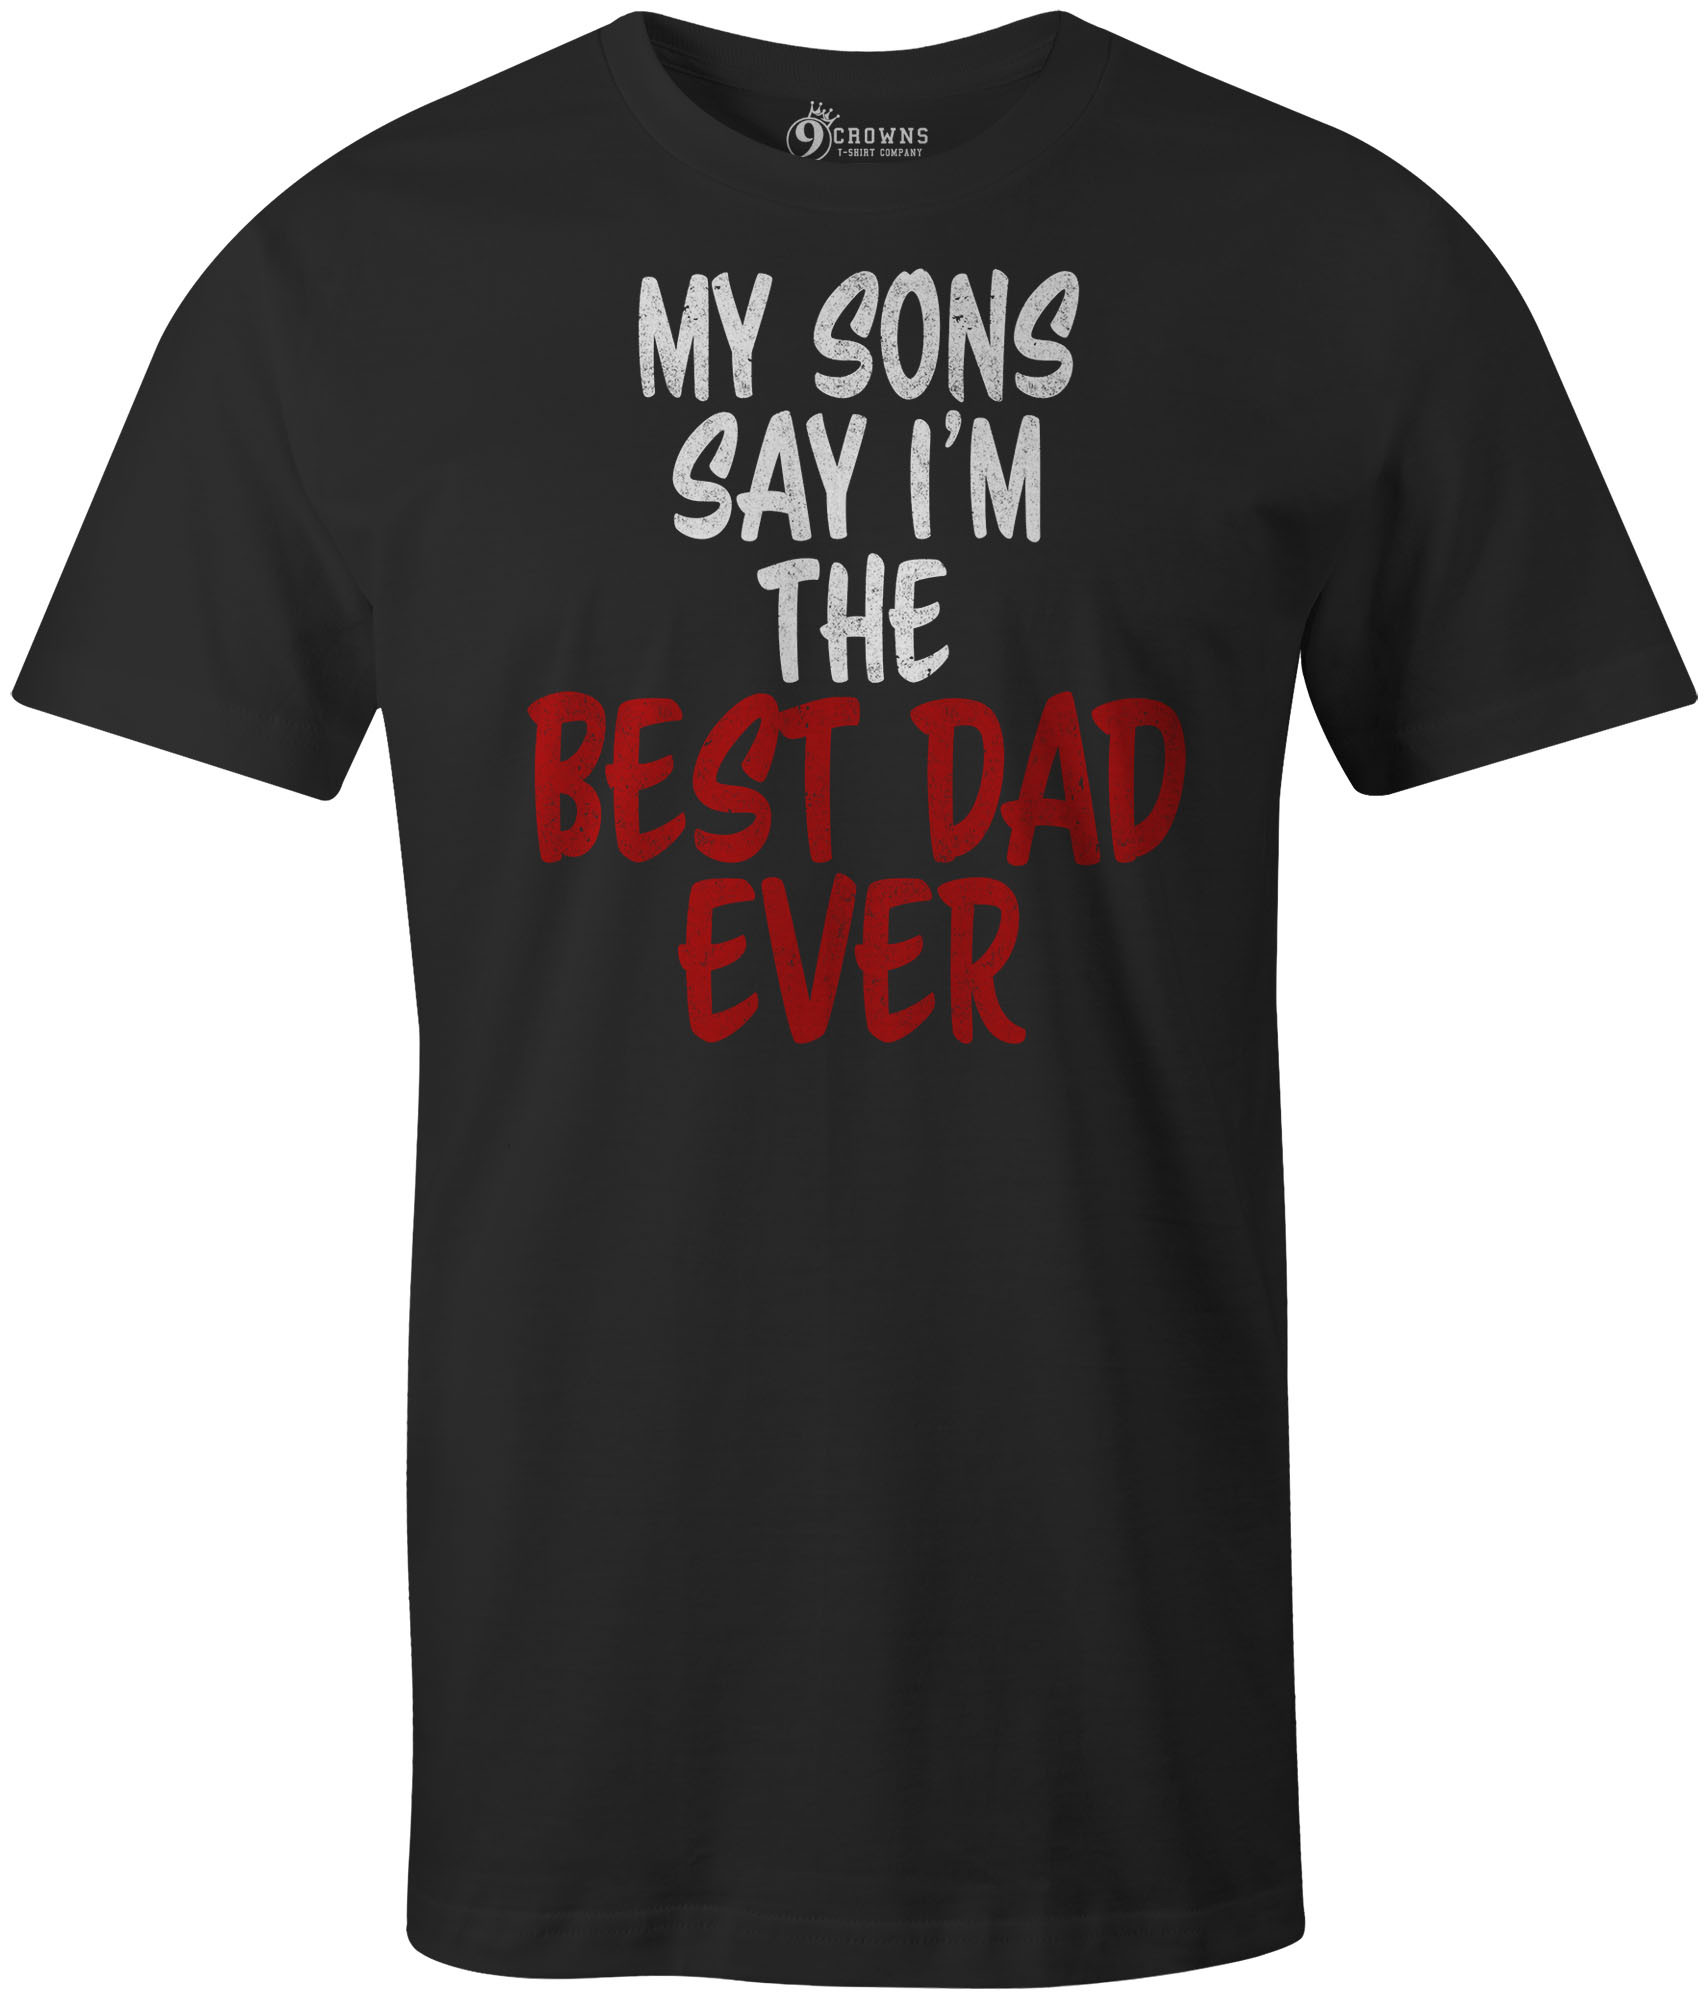 Men'S Father'S Day Gift Ideas
 9 Crowns Men s Funny Best Dad Super Cool Father s Day T